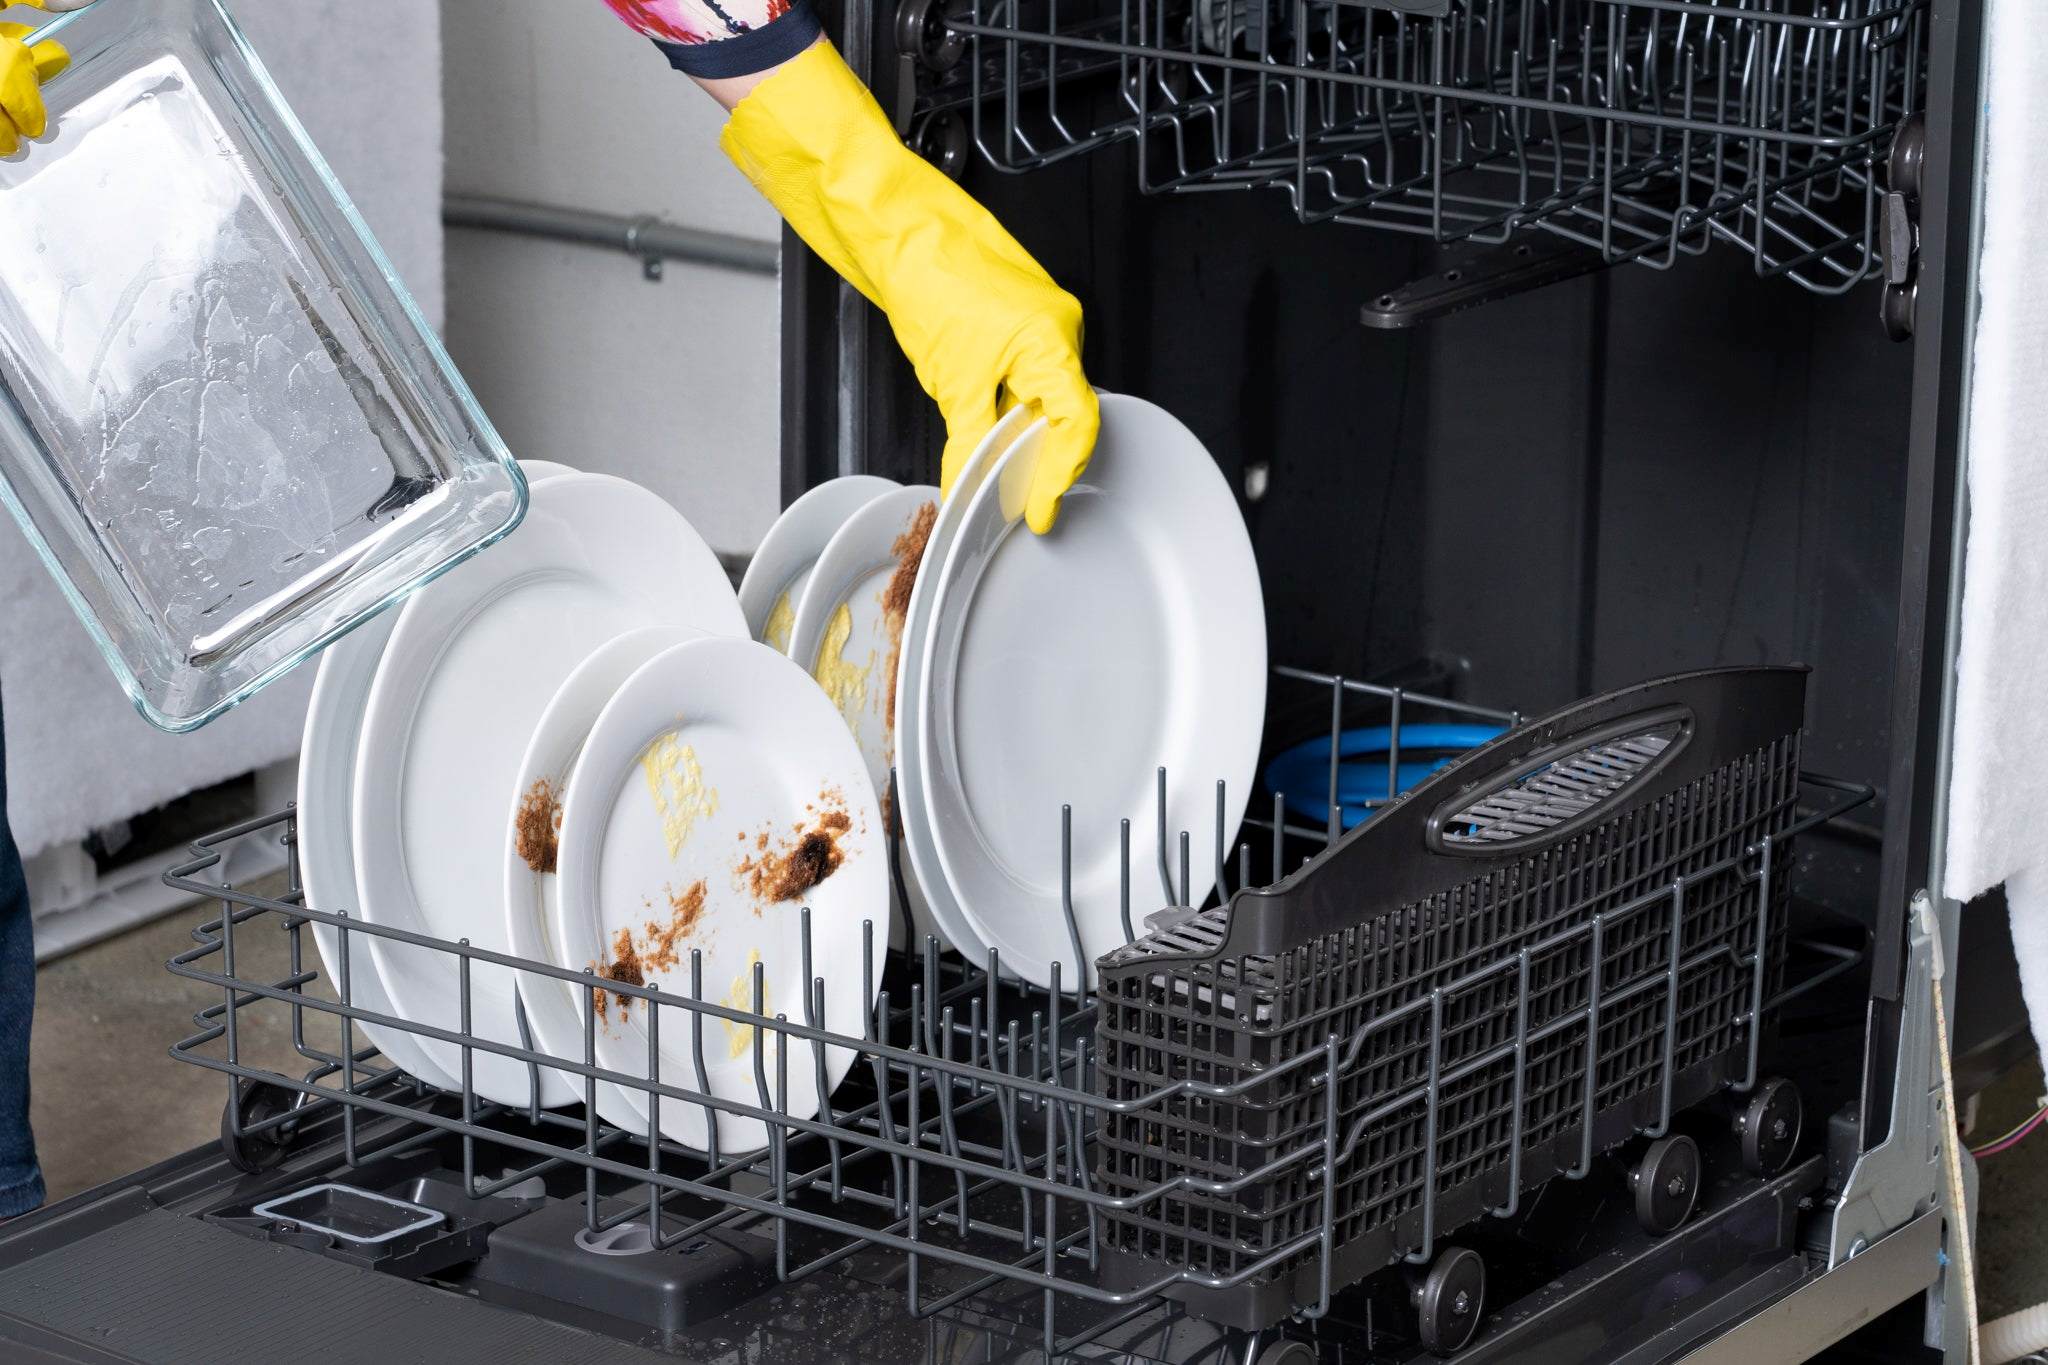 Discover The Surprising Source Of Your Dishwasher’s Sneaky Water Leak